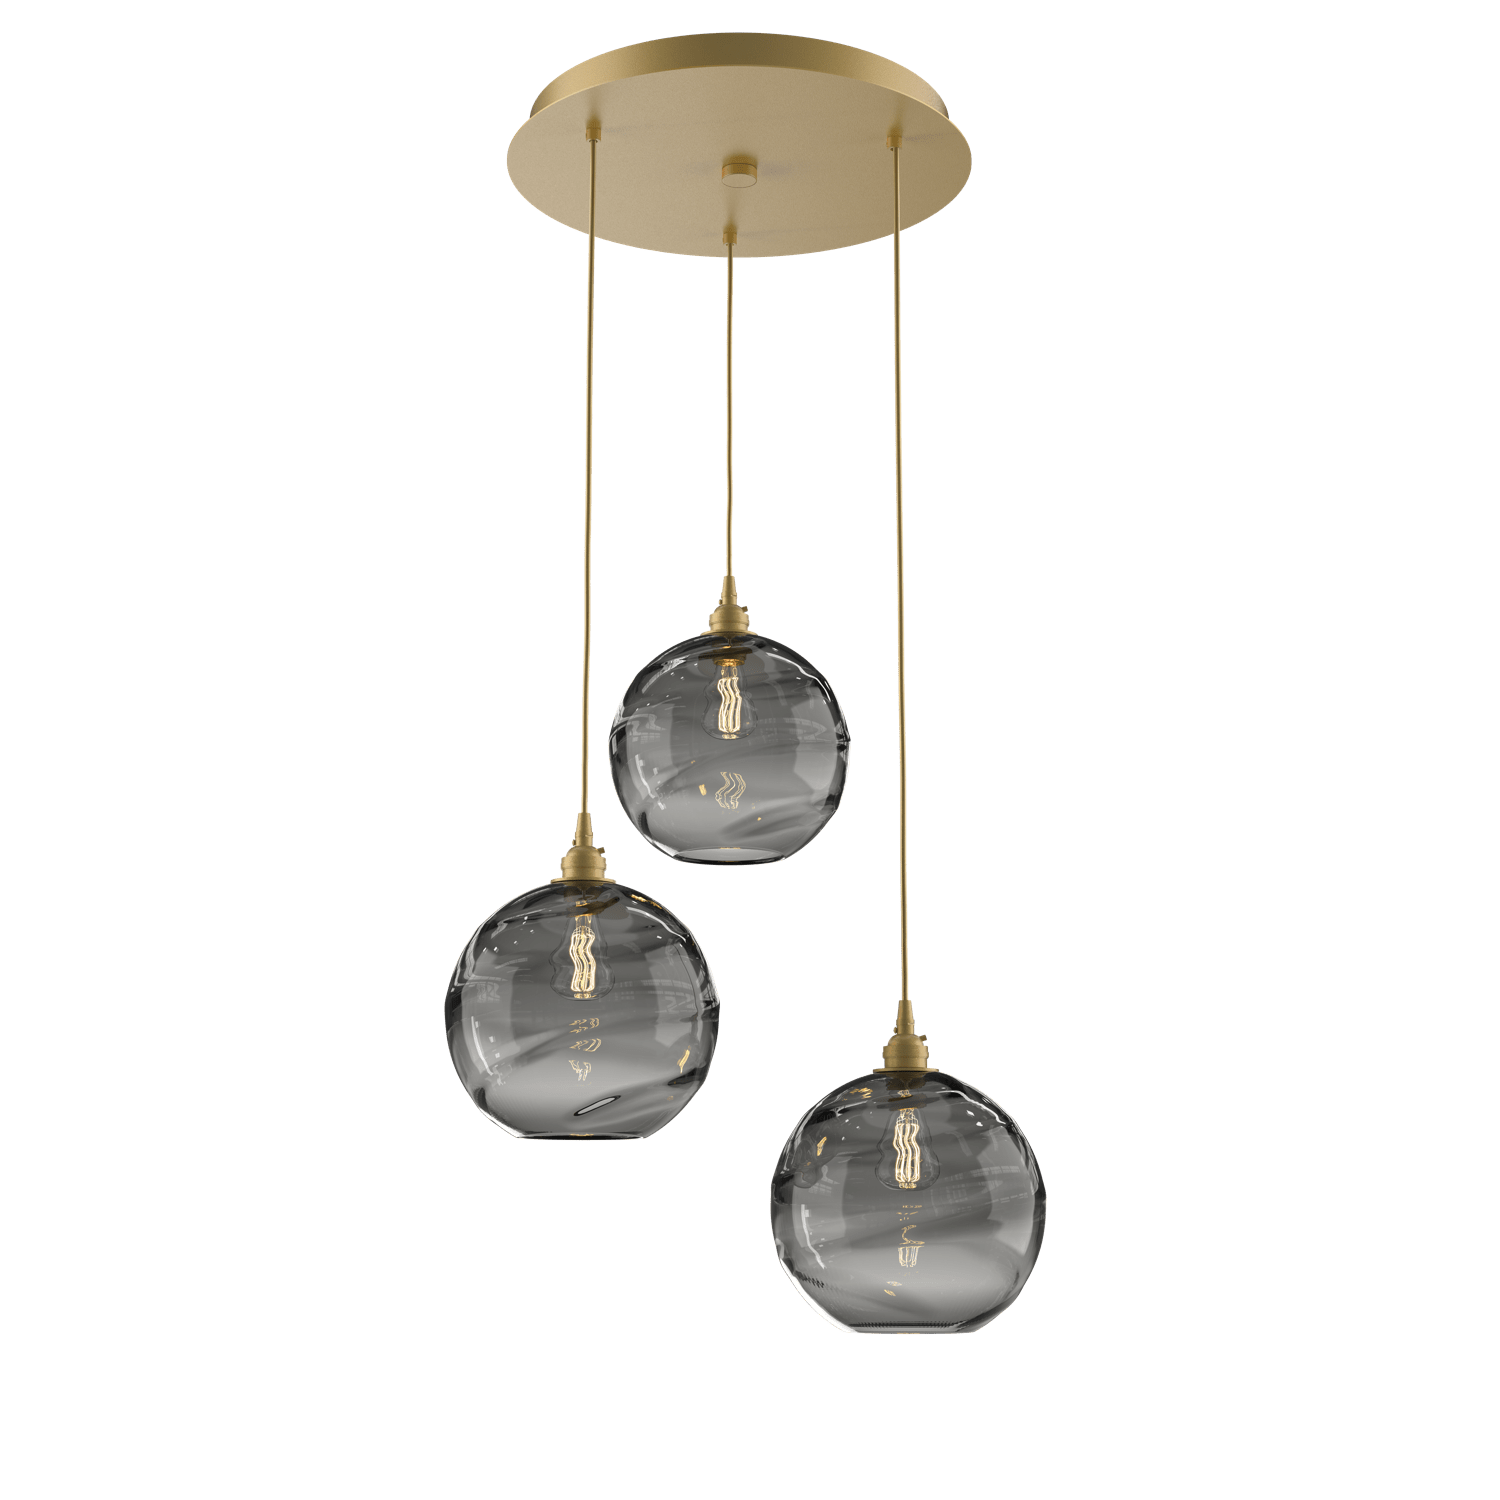 CHB0047-03-GB-OS-Hammerton-Studio-Optic-Blown-Glass-Terra-3-light-round-pendant-chandelier-with-gilded-brass-finish-and-optic-smoke-blown-glass-shades-and-incandescent-lamping